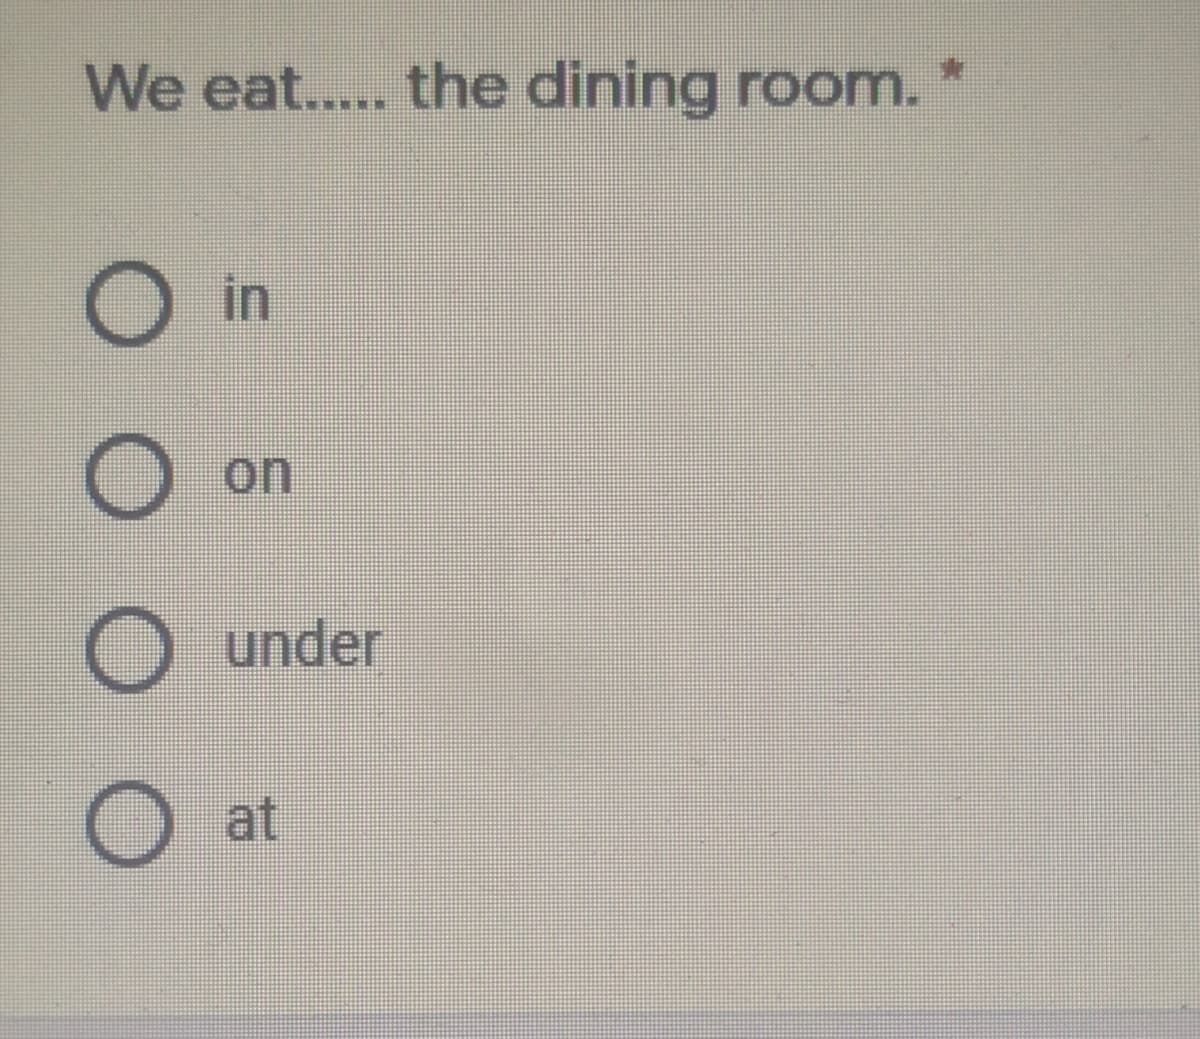 We eat.... the dining room.*
O in
on
O under
at
